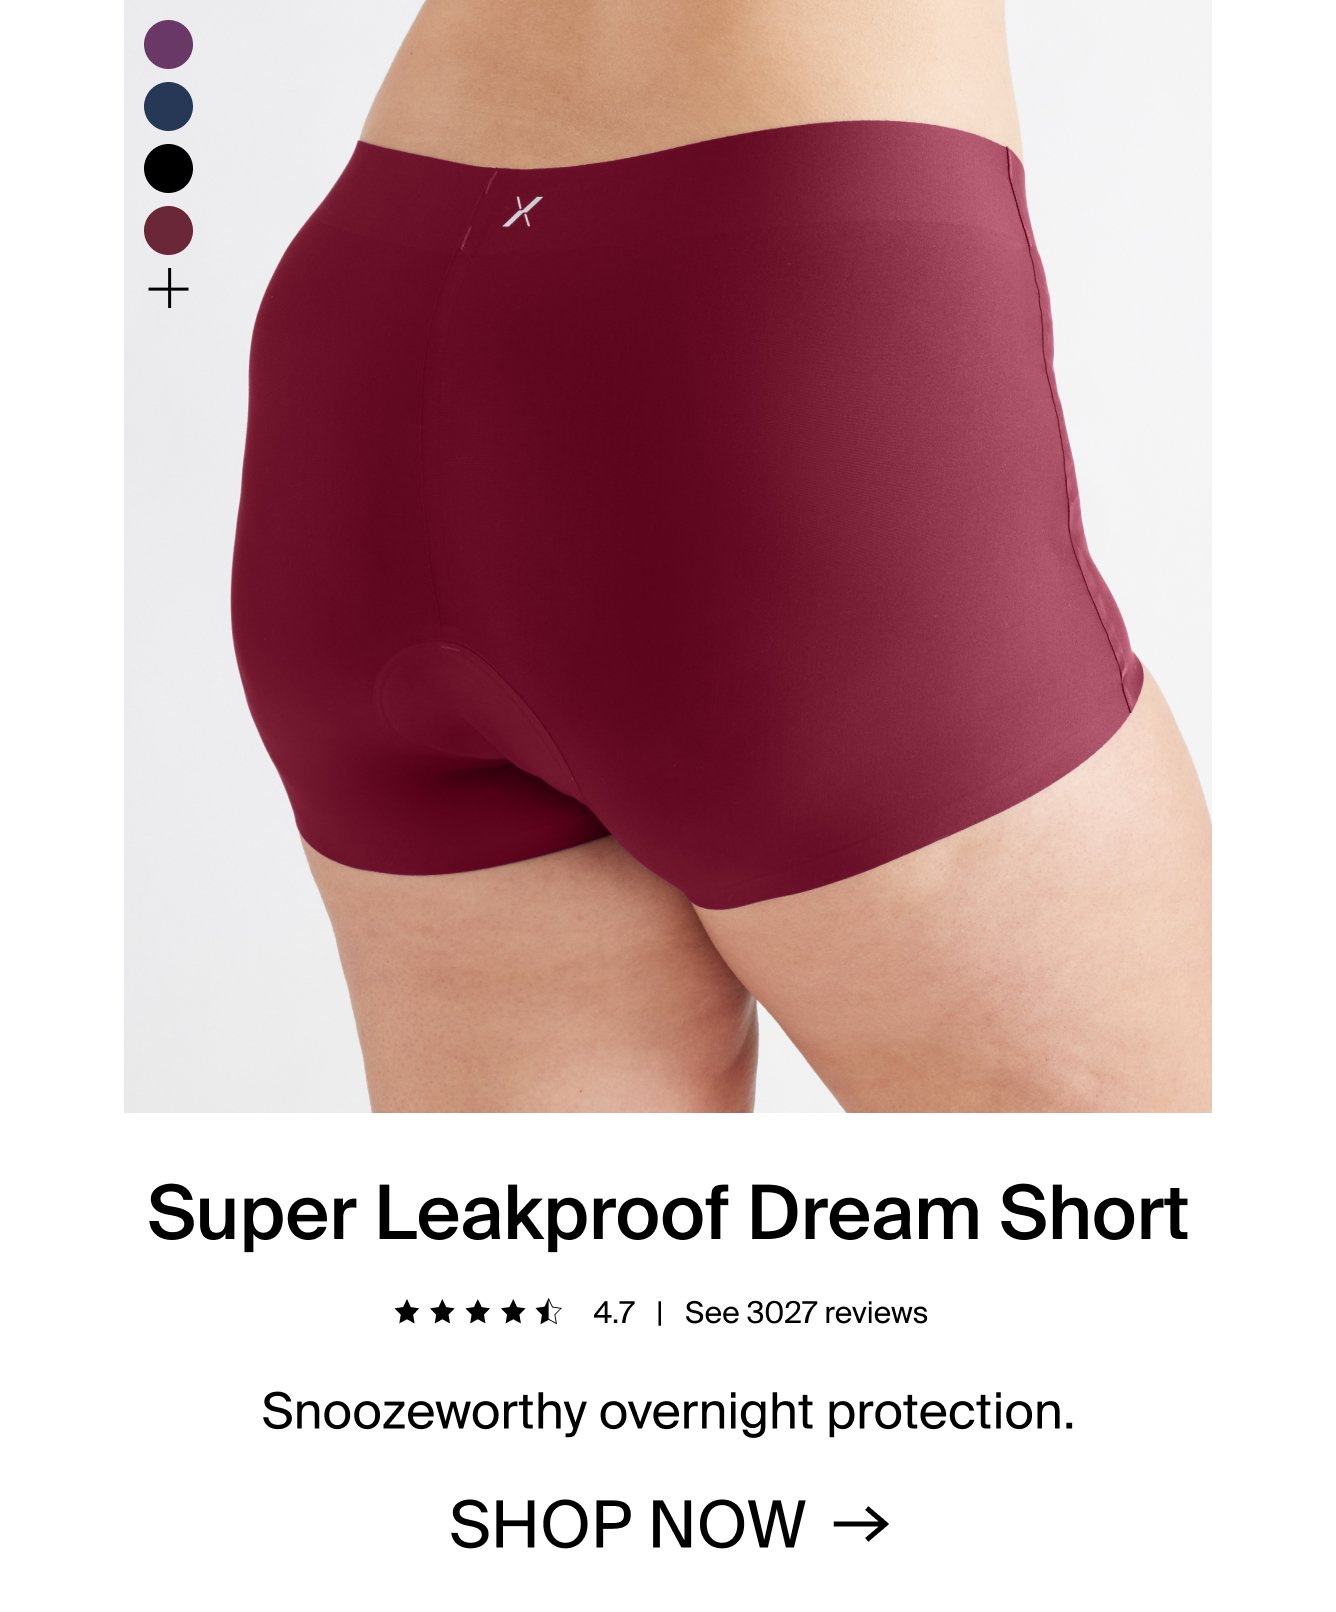 Super Leakproof Dream Short. 4.7 stars. see 3027 reviews. Snoozeworthy overnight protection. SHOP NOW.